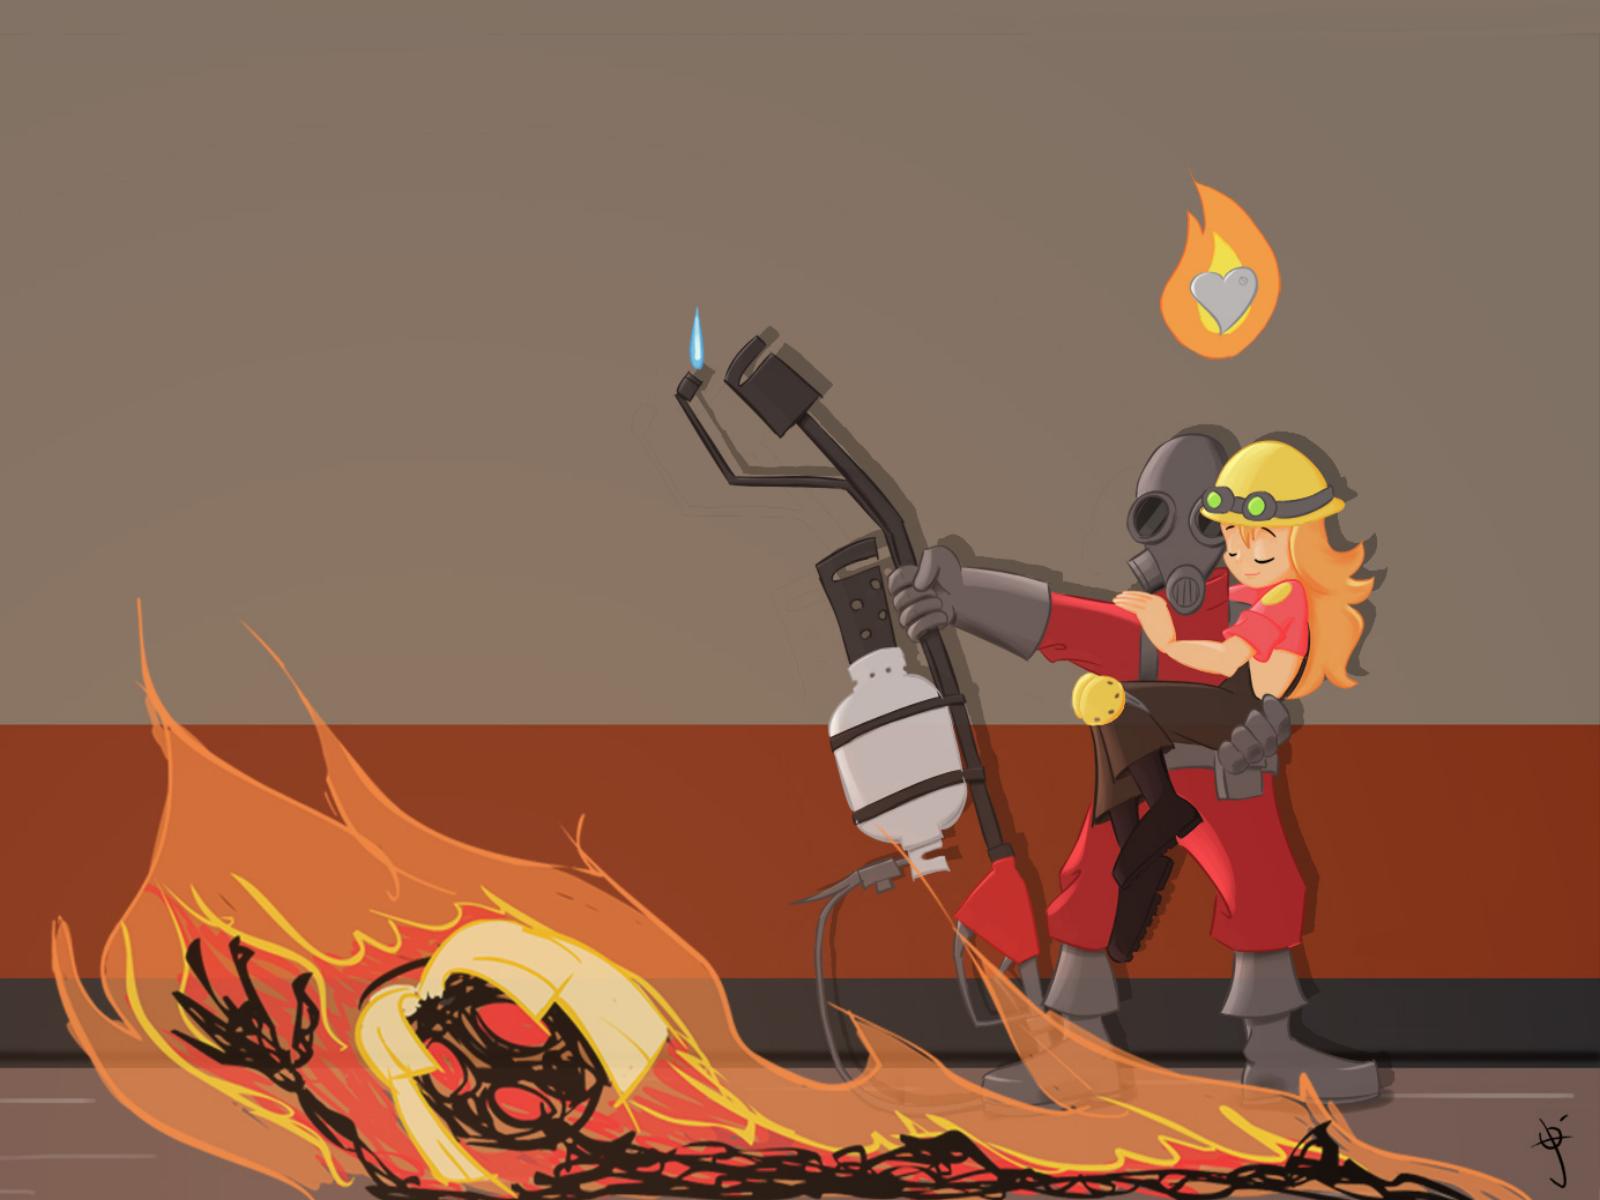 318 Team Fortress 2 HD Wallpapers | Backgrounds - Wallpaper Abyss